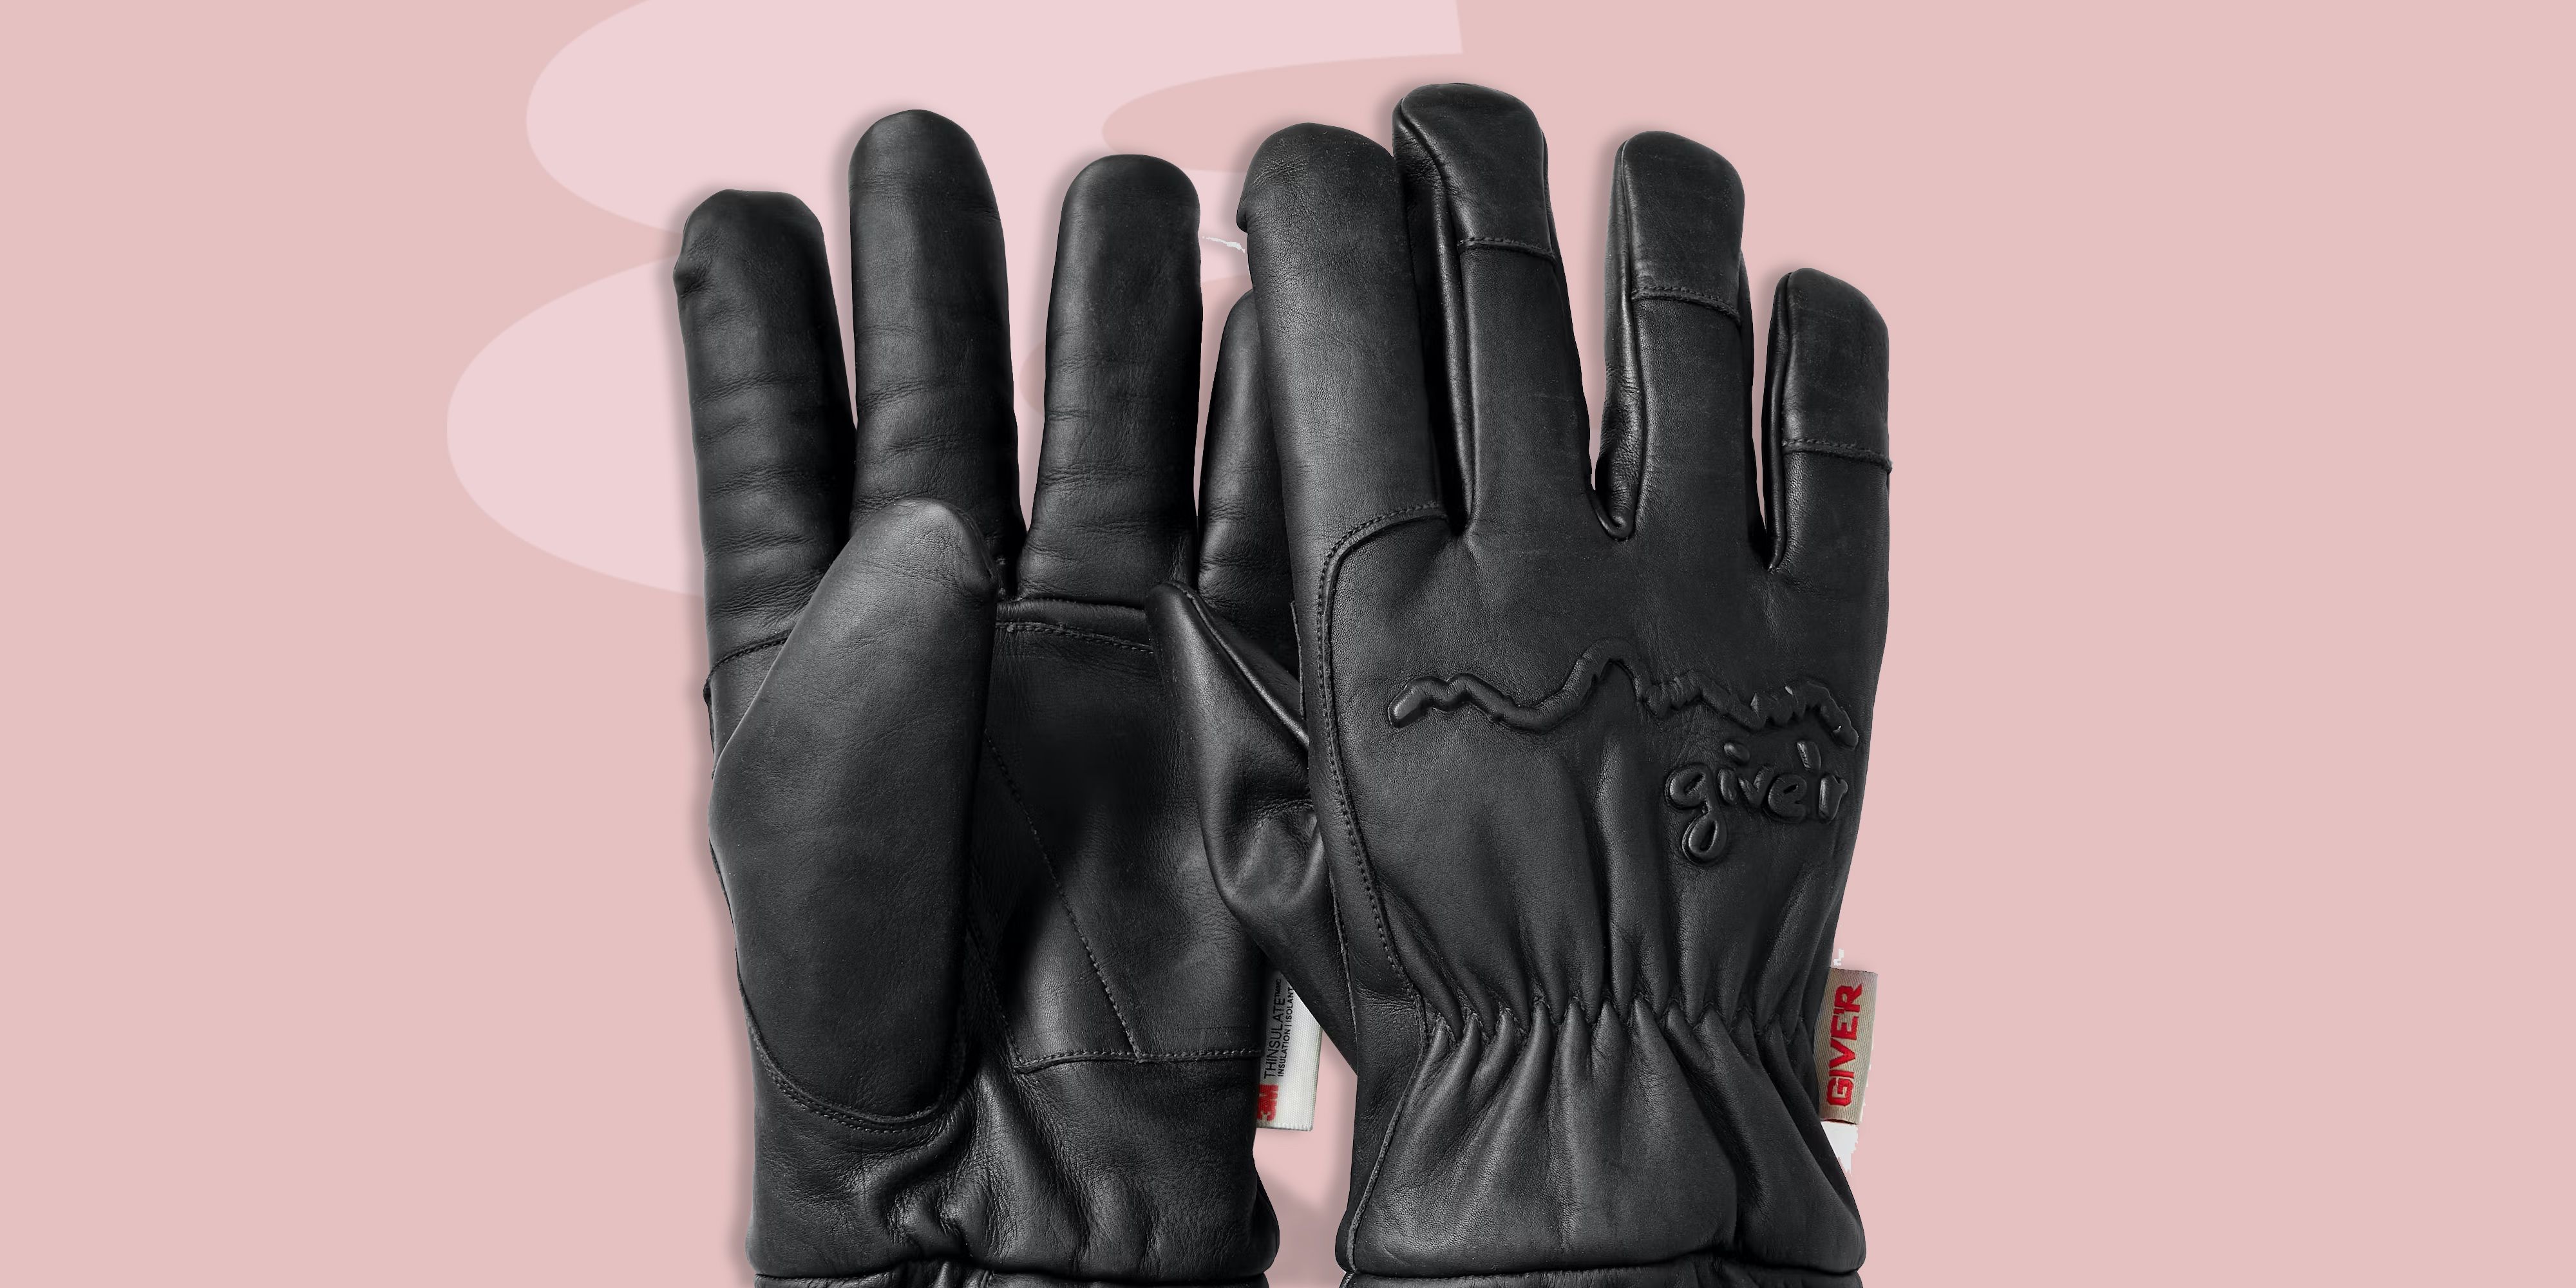 Leather Work Gloves, Give'r Classic Fit, Durable And Thick